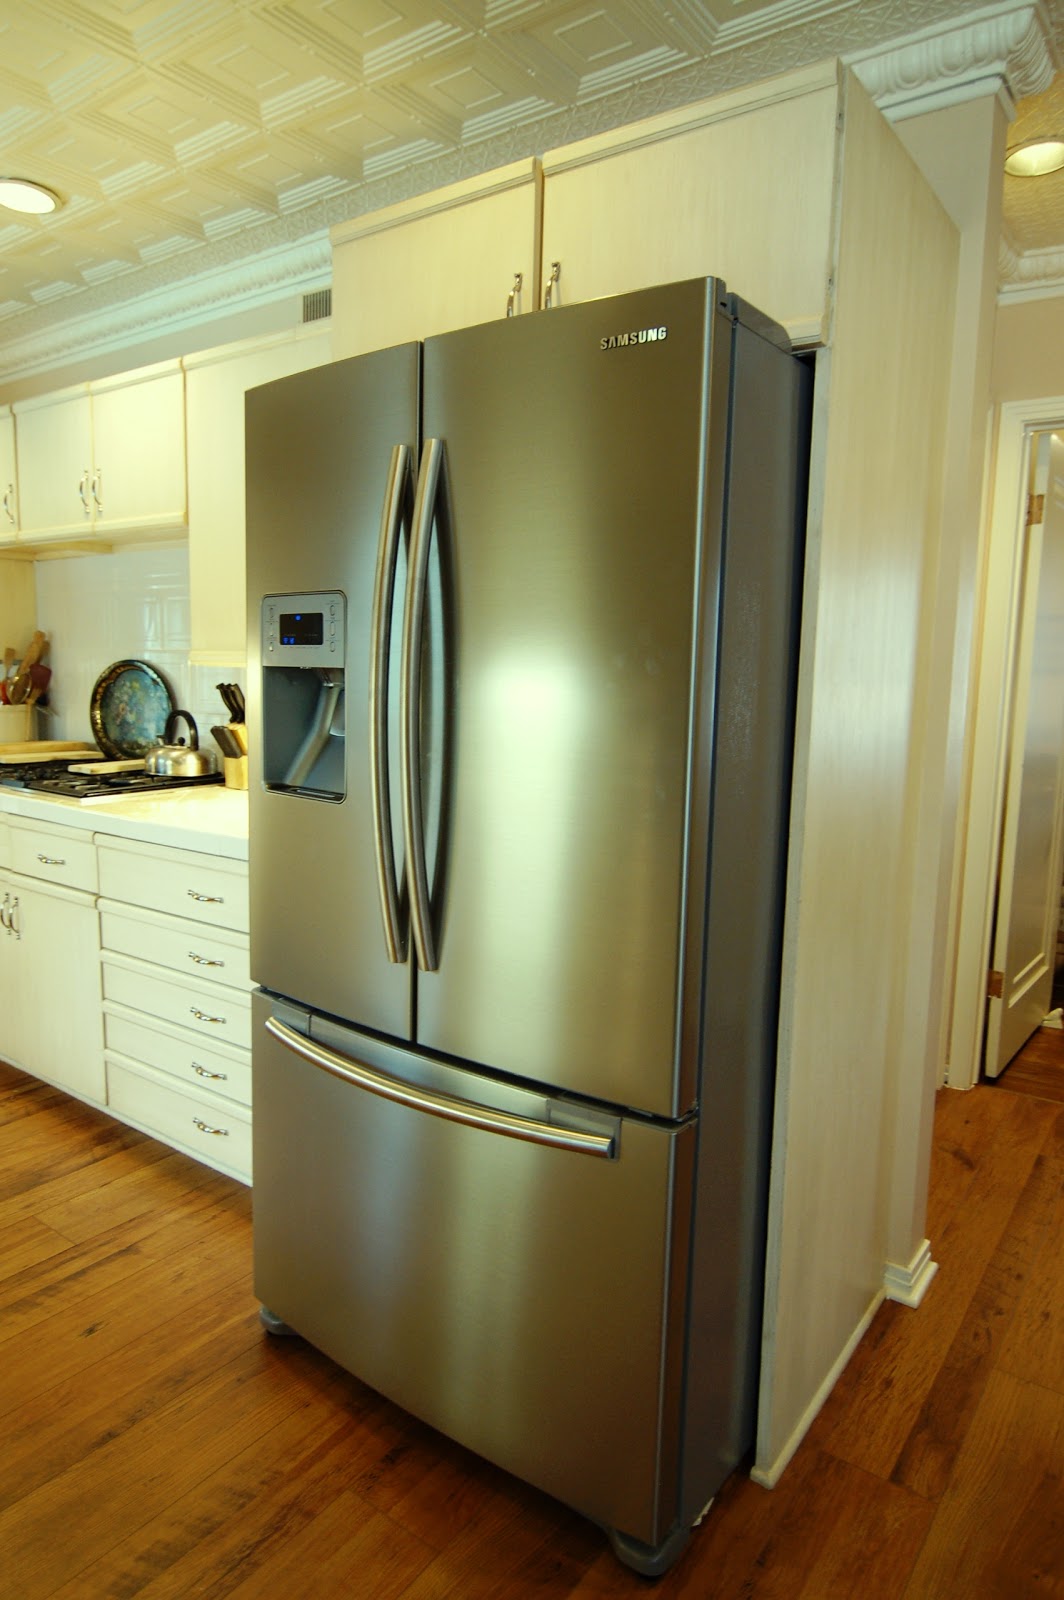 north-dallas-real-estate-get-your-appliance-rebate-now